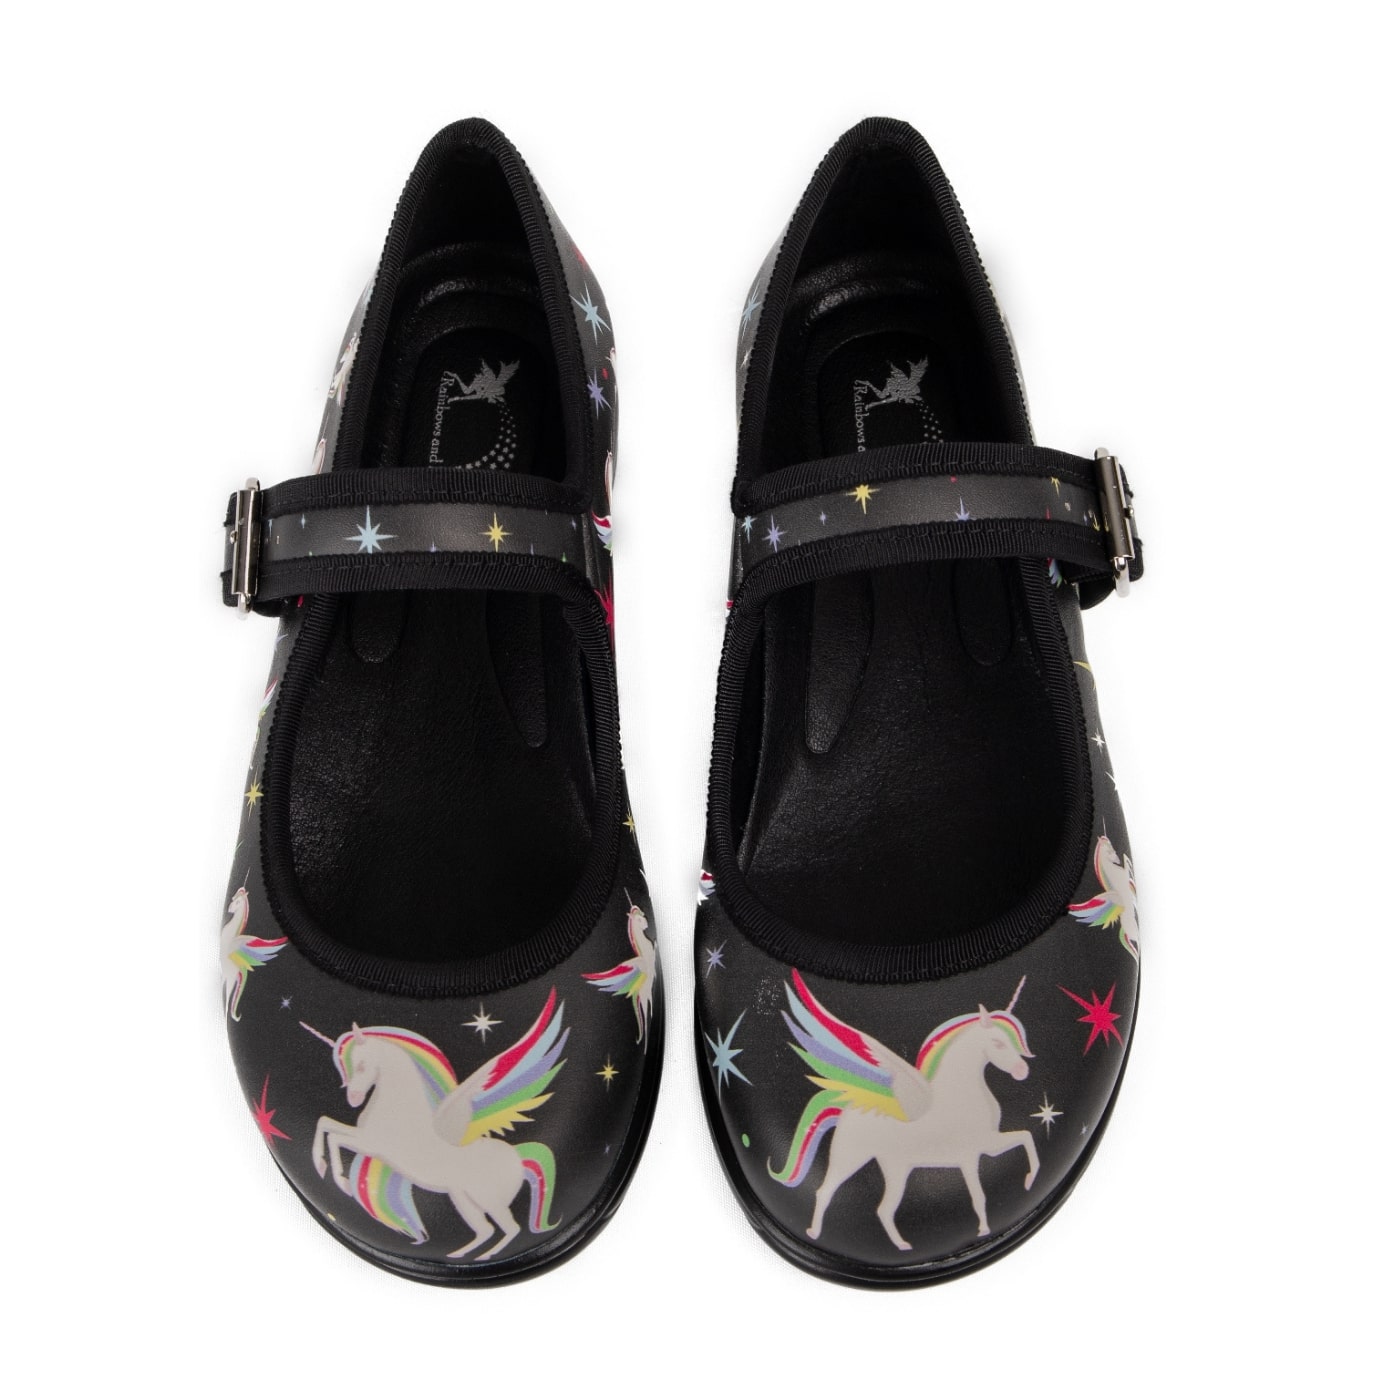 Blessing Mary Janes by RainbowsAndFairies.com.au (Winged Unicorn - Unicorn - Mismtached Shoes - Quirky Shoes - Fantasy - Rainbow) - SKU: FW_MARYJ_BLESS_ORG - Pic-02